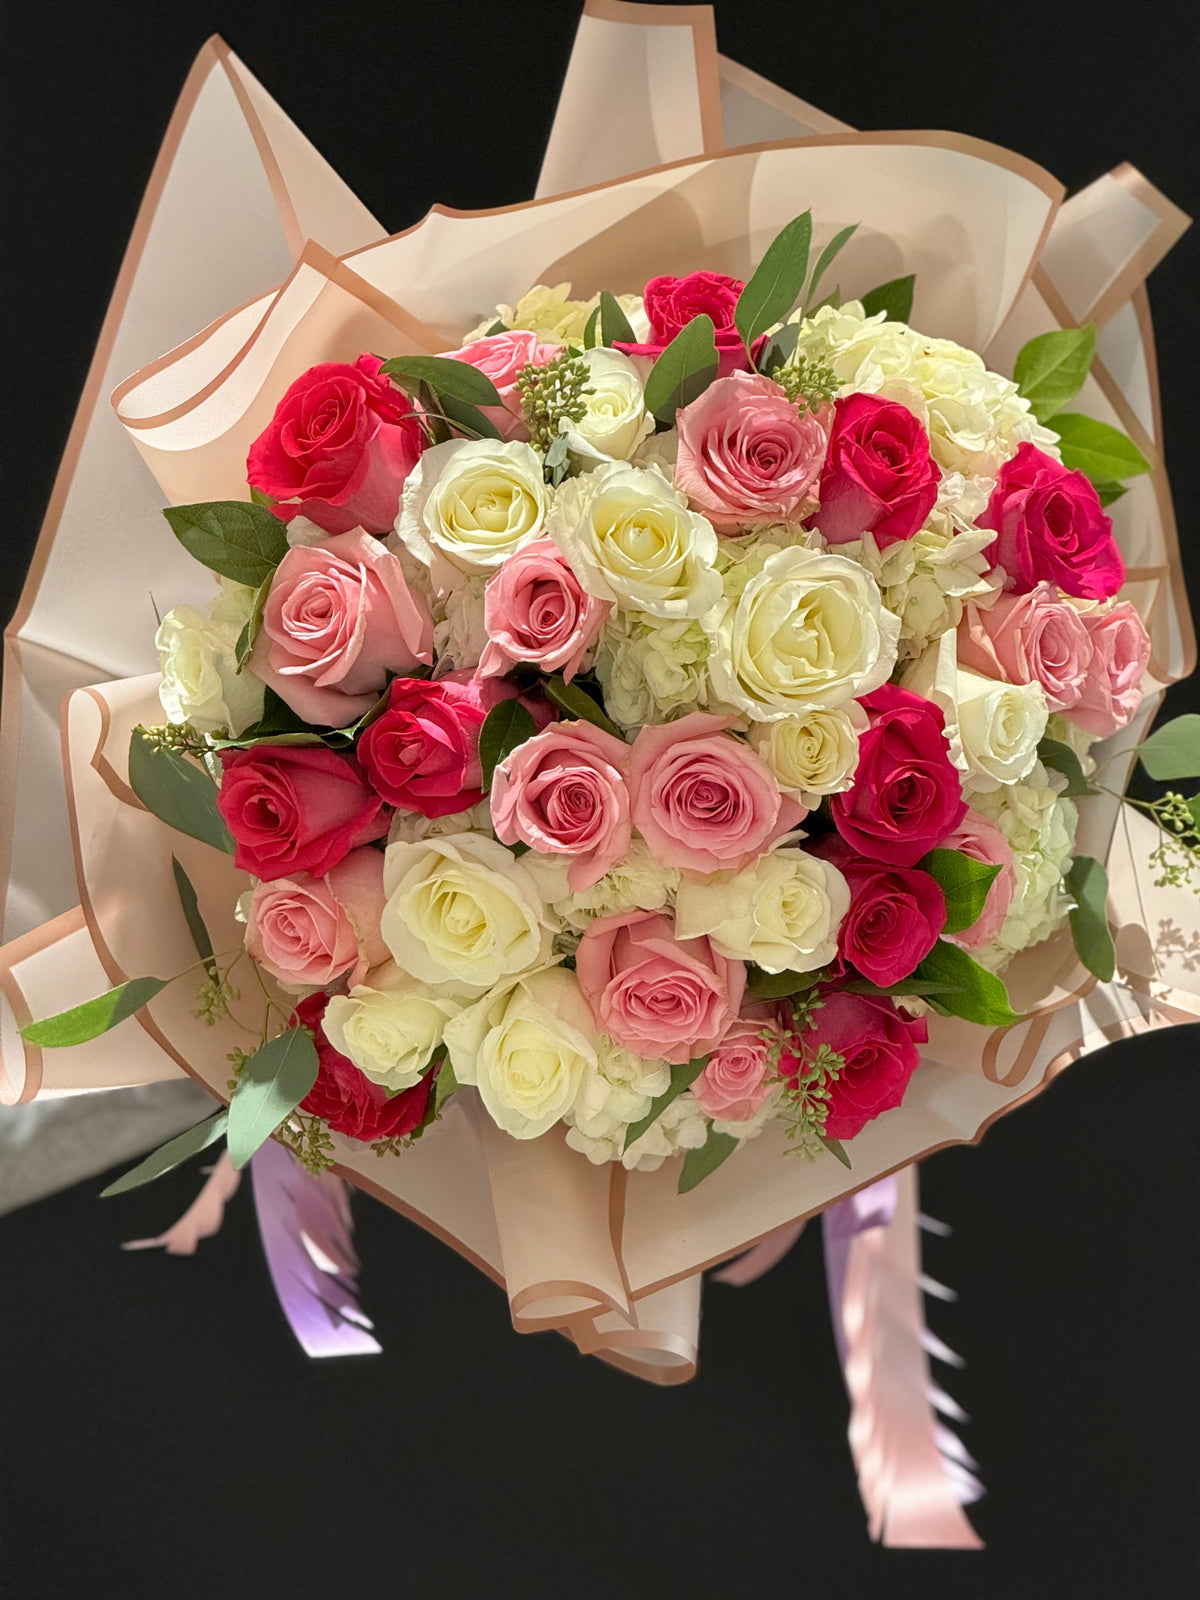 Radiate joy with Yonge Florist's "You Are My Rainbow Bouquet". Perfect for any occasion. Order now for vibrant roses, hydrangeas, and timely local/GTA delivery! more zoomed in